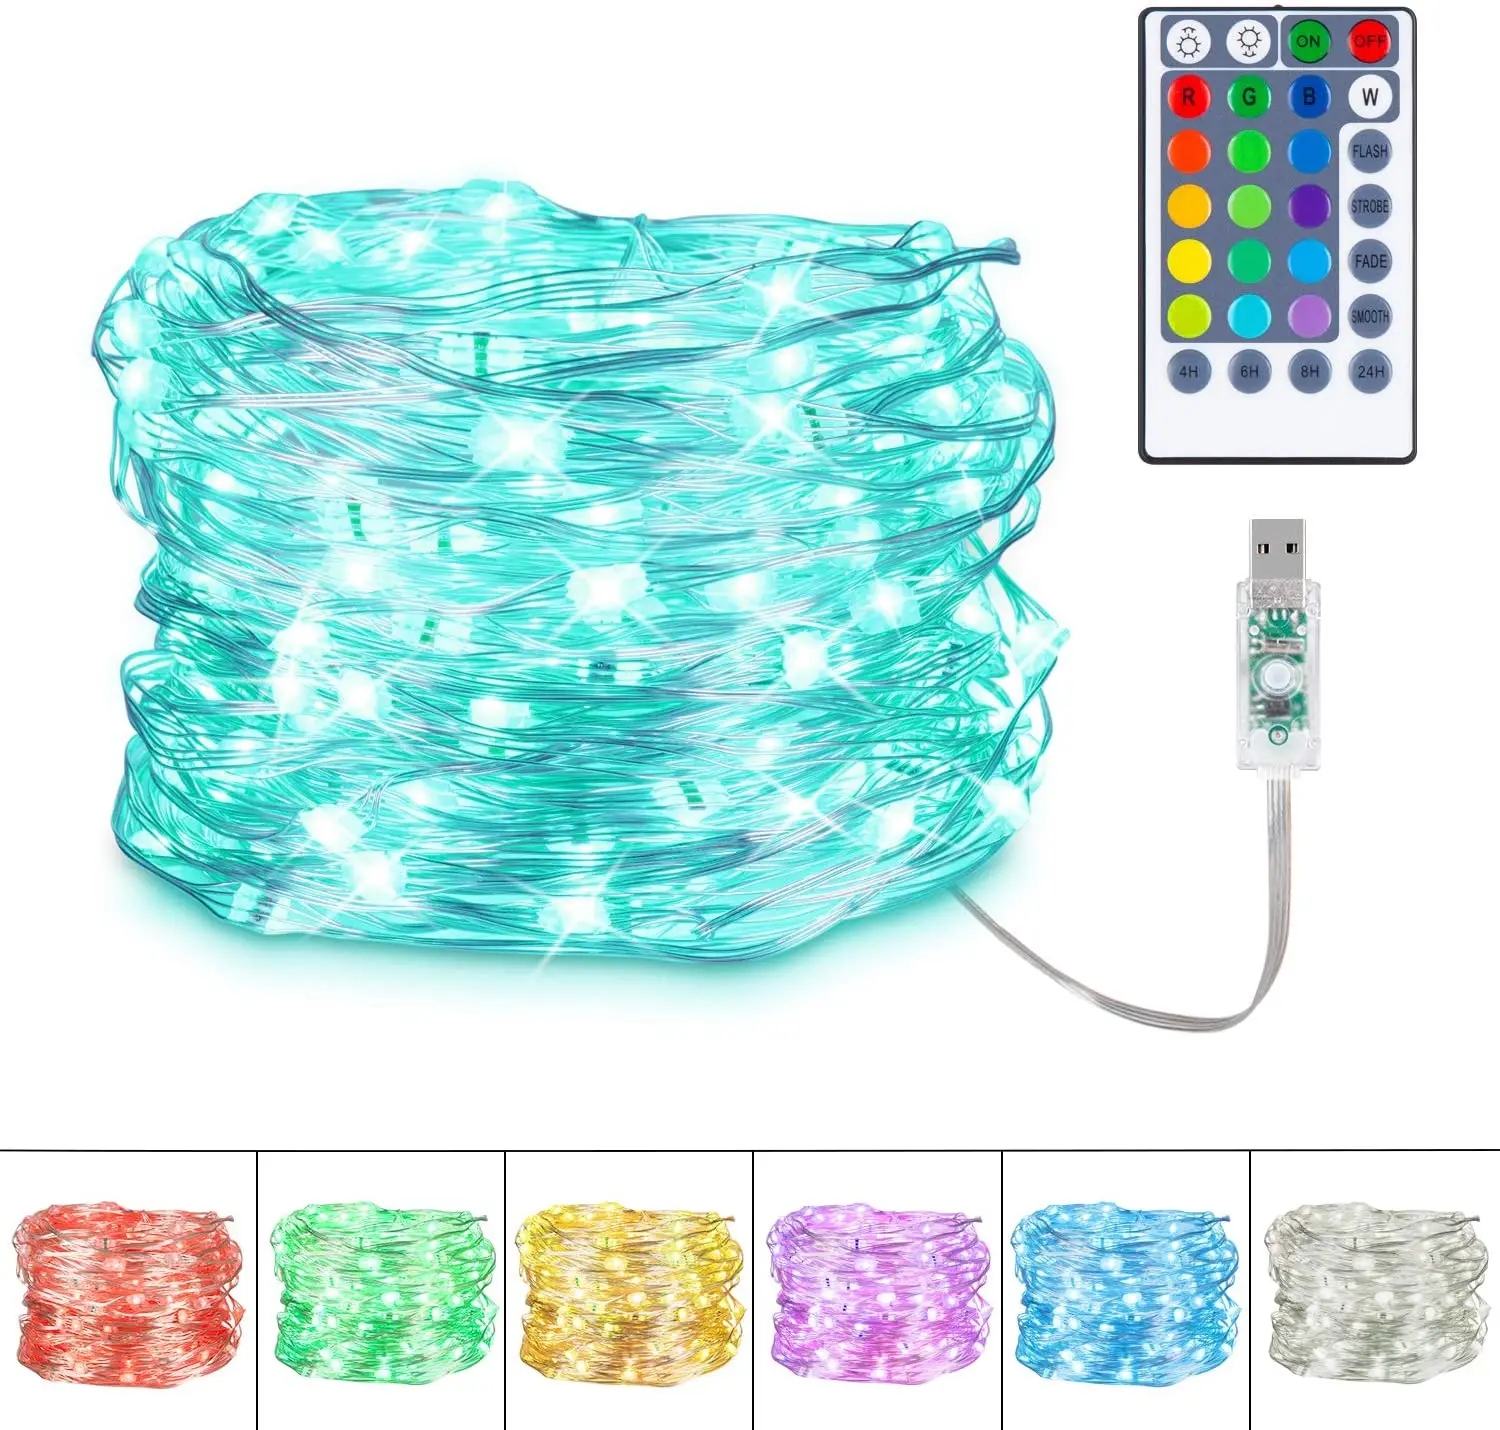 Multicolor USB Fairy String Lights with remote 33ft 100 LEDs Waterproof Cute light for kids bedroom, Christmas colorful decor